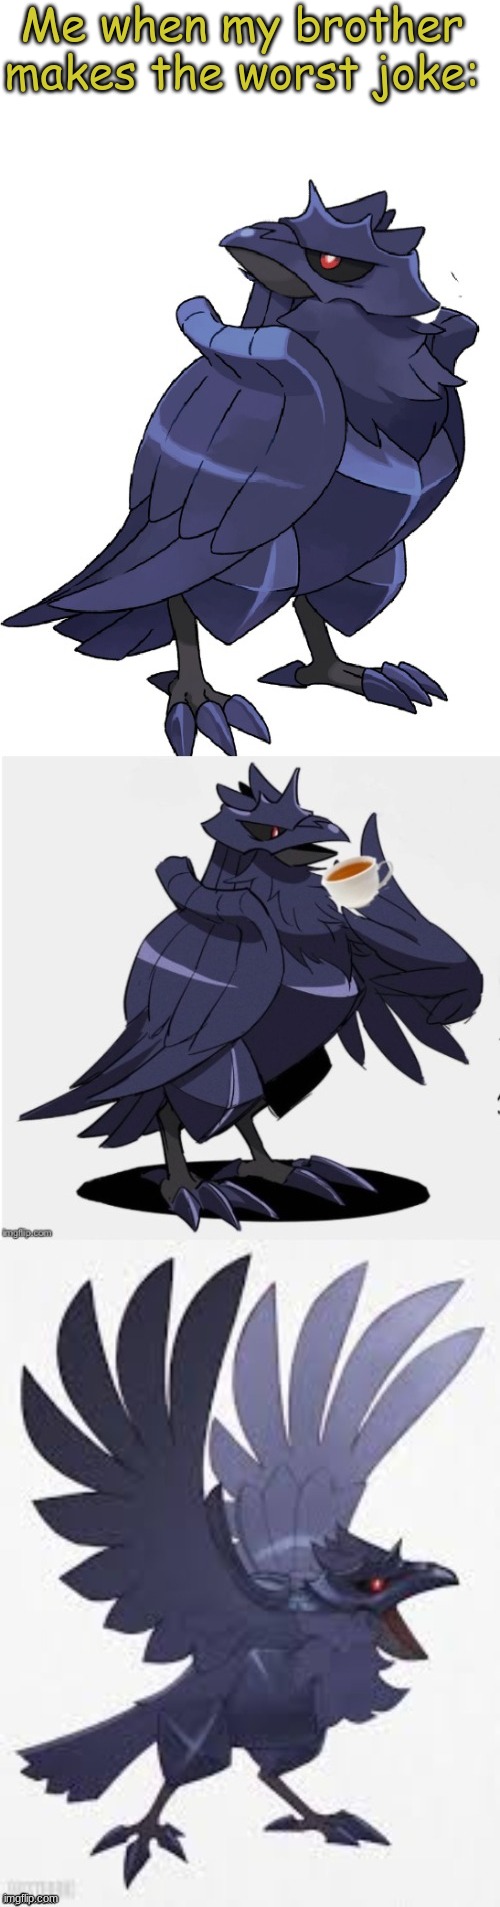 Reality go brr | Me when my brother makes the worst joke: | image tagged in bad pun ttdc,bad joke,corviknight,corviknight memes,funny,memes | made w/ Imgflip meme maker